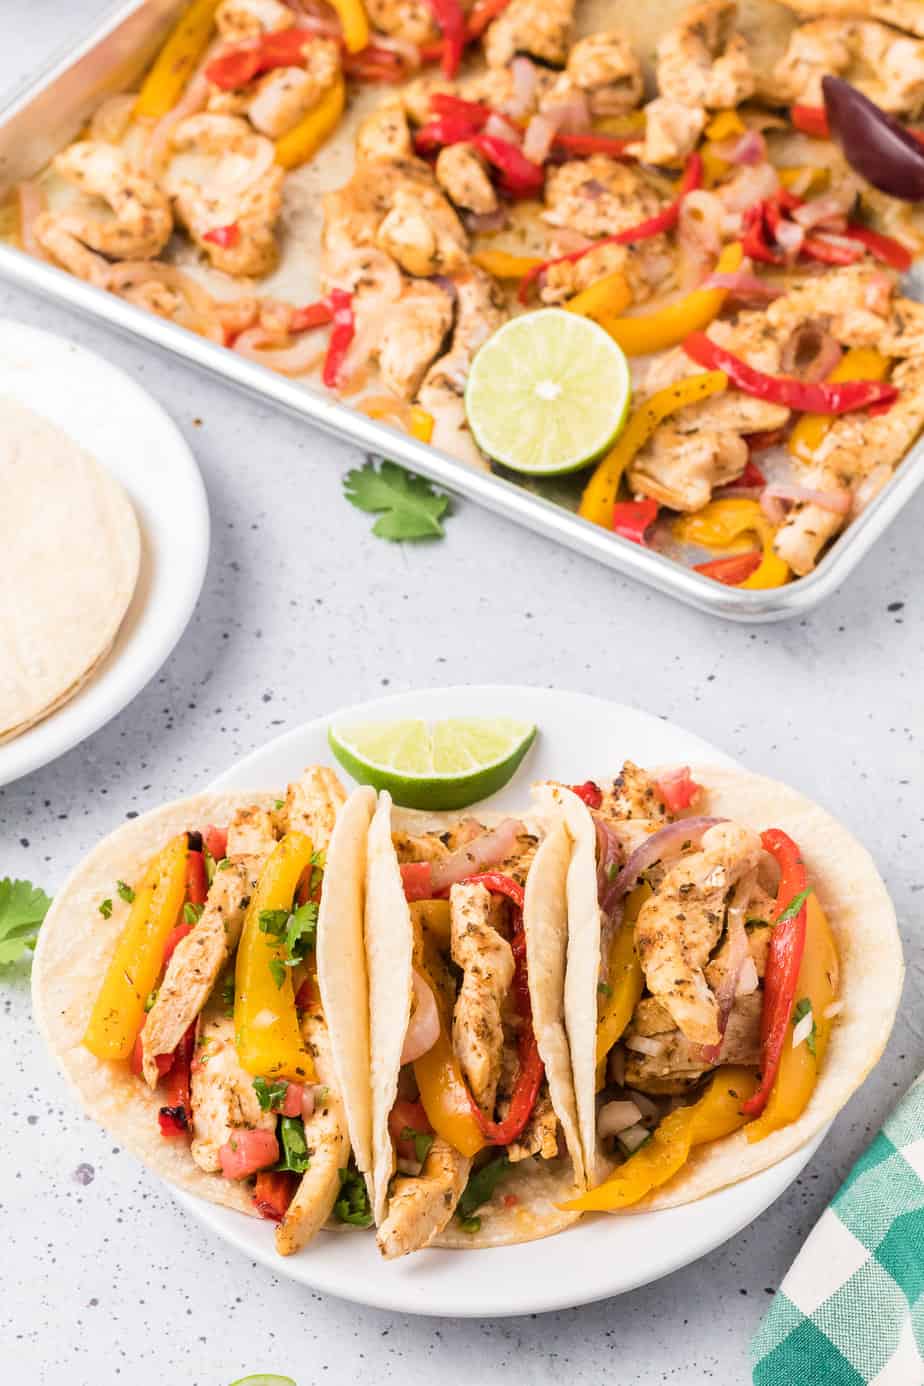 Chicken fajita tacos on a plate with a plate of tortillas and a sheet pan of chicken and vegetables in the background.